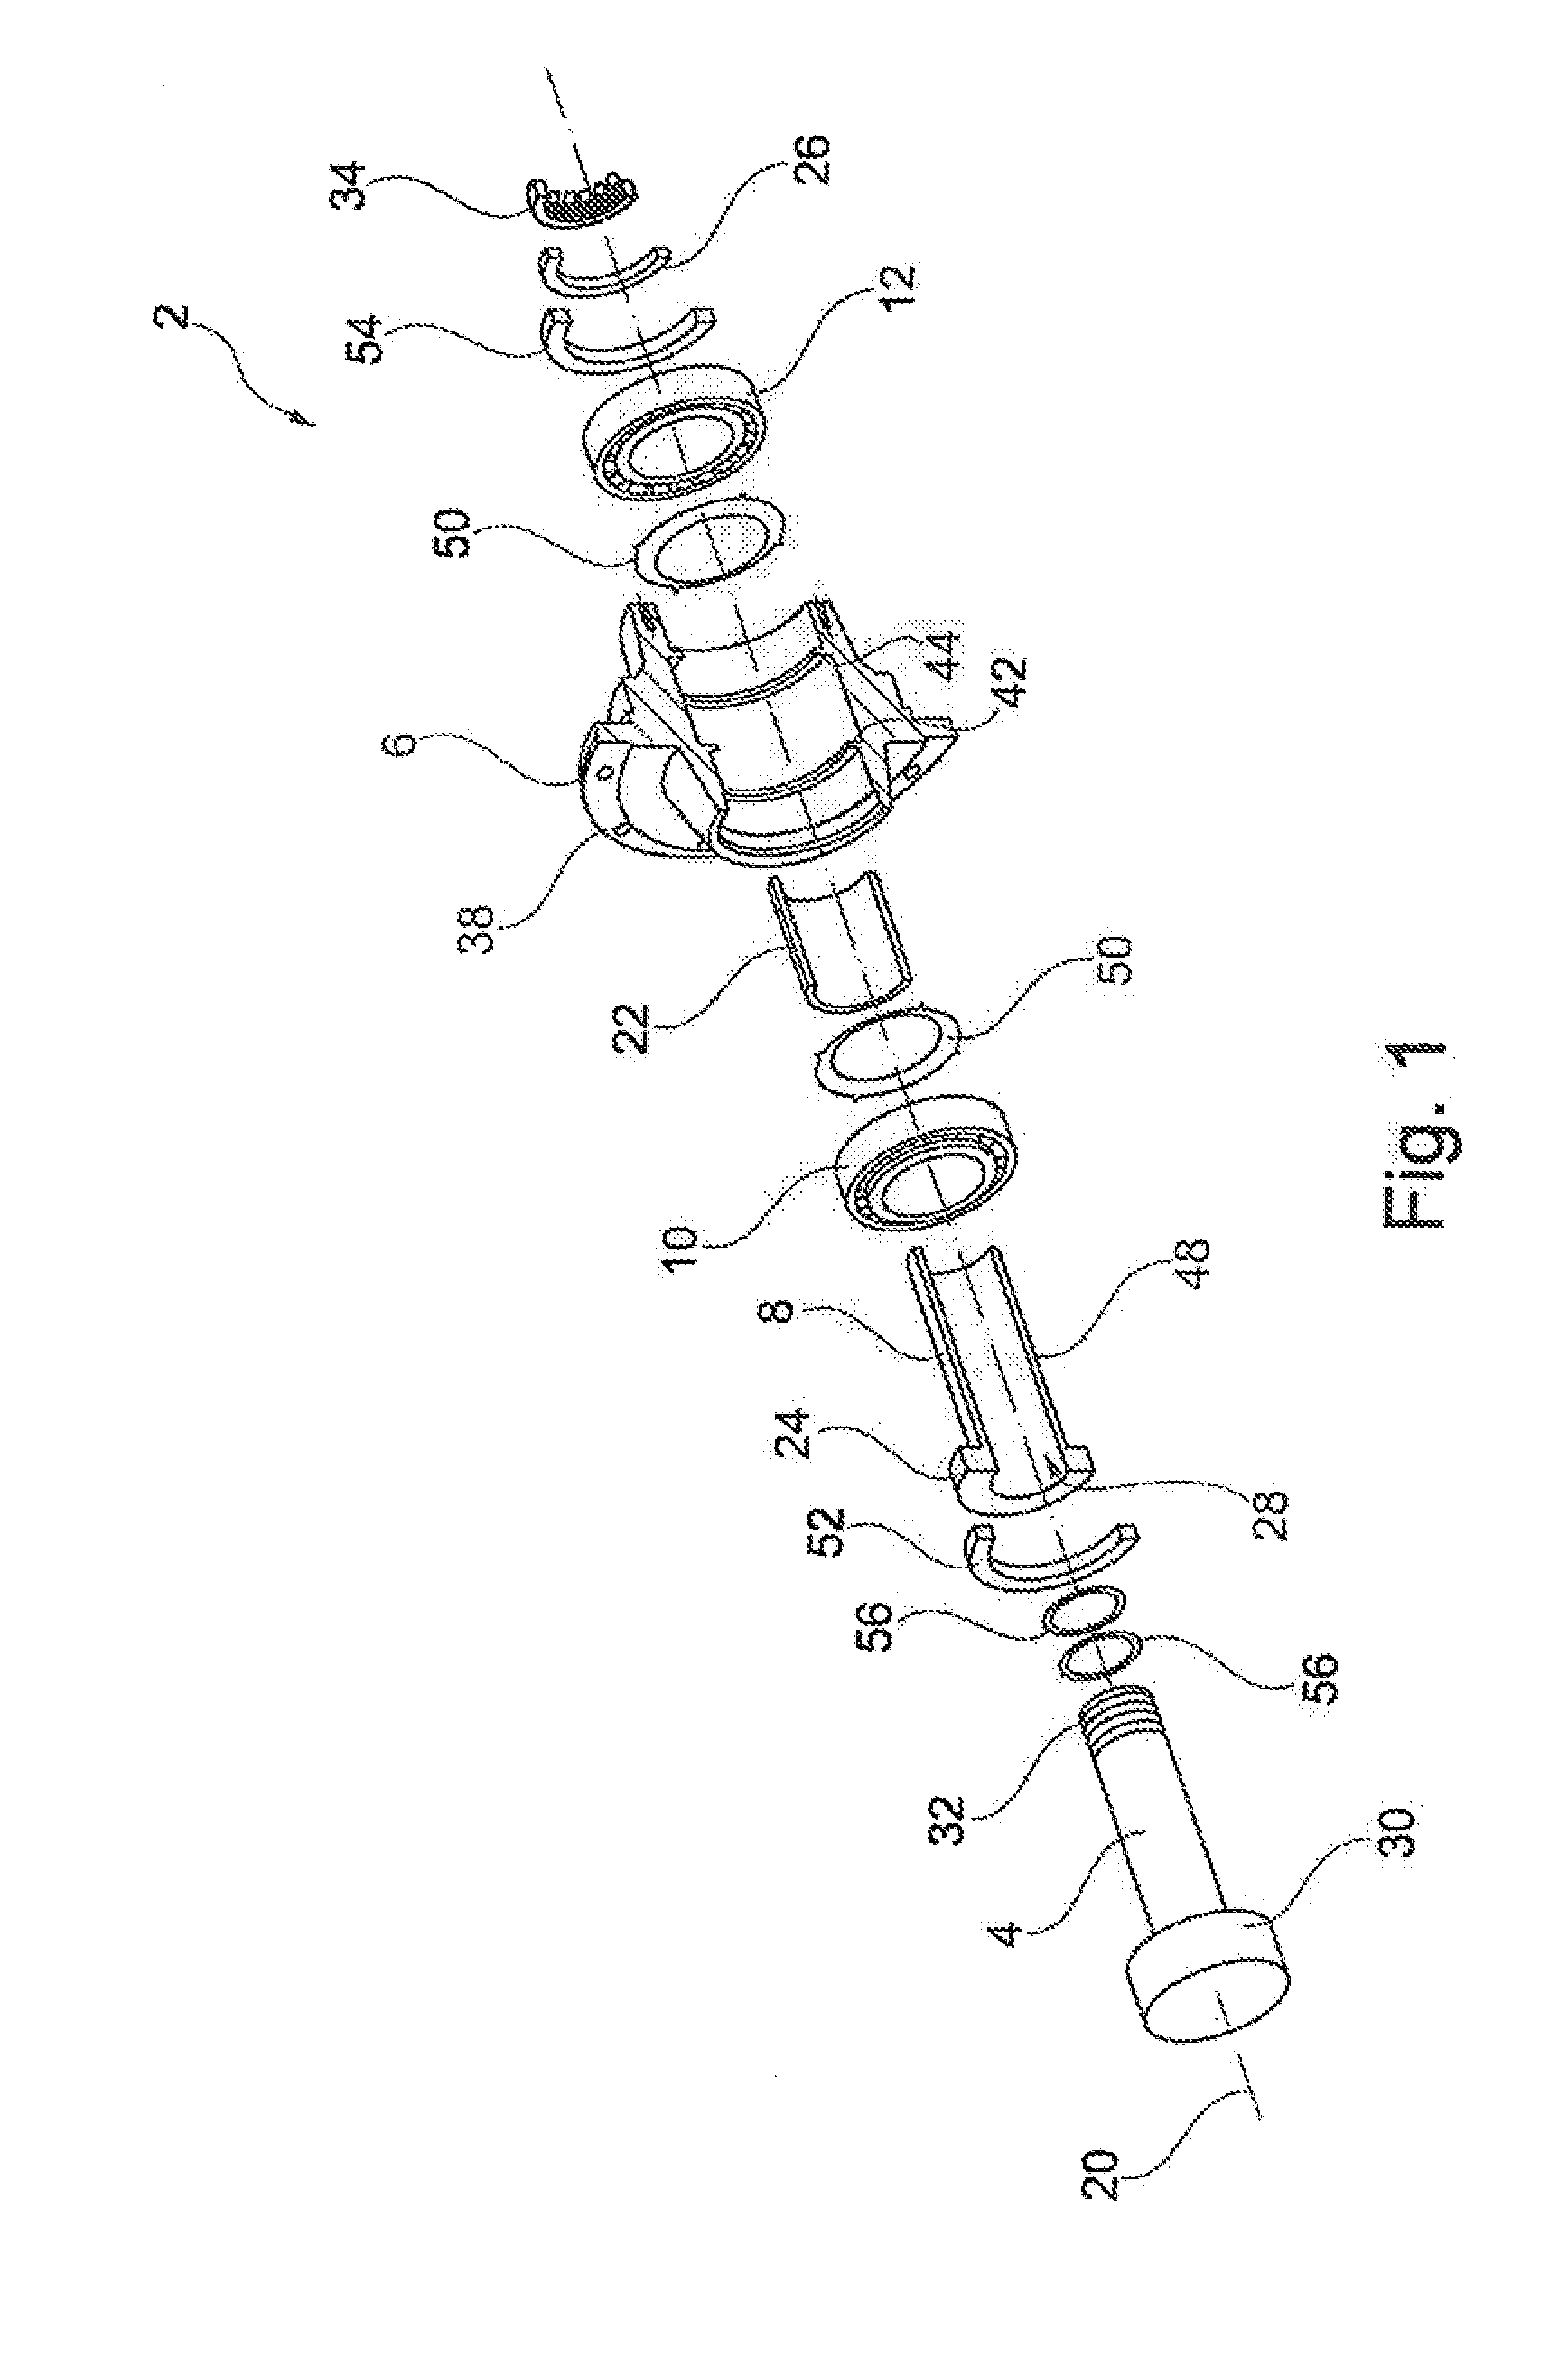 Wheel bearing for a utility vehicle